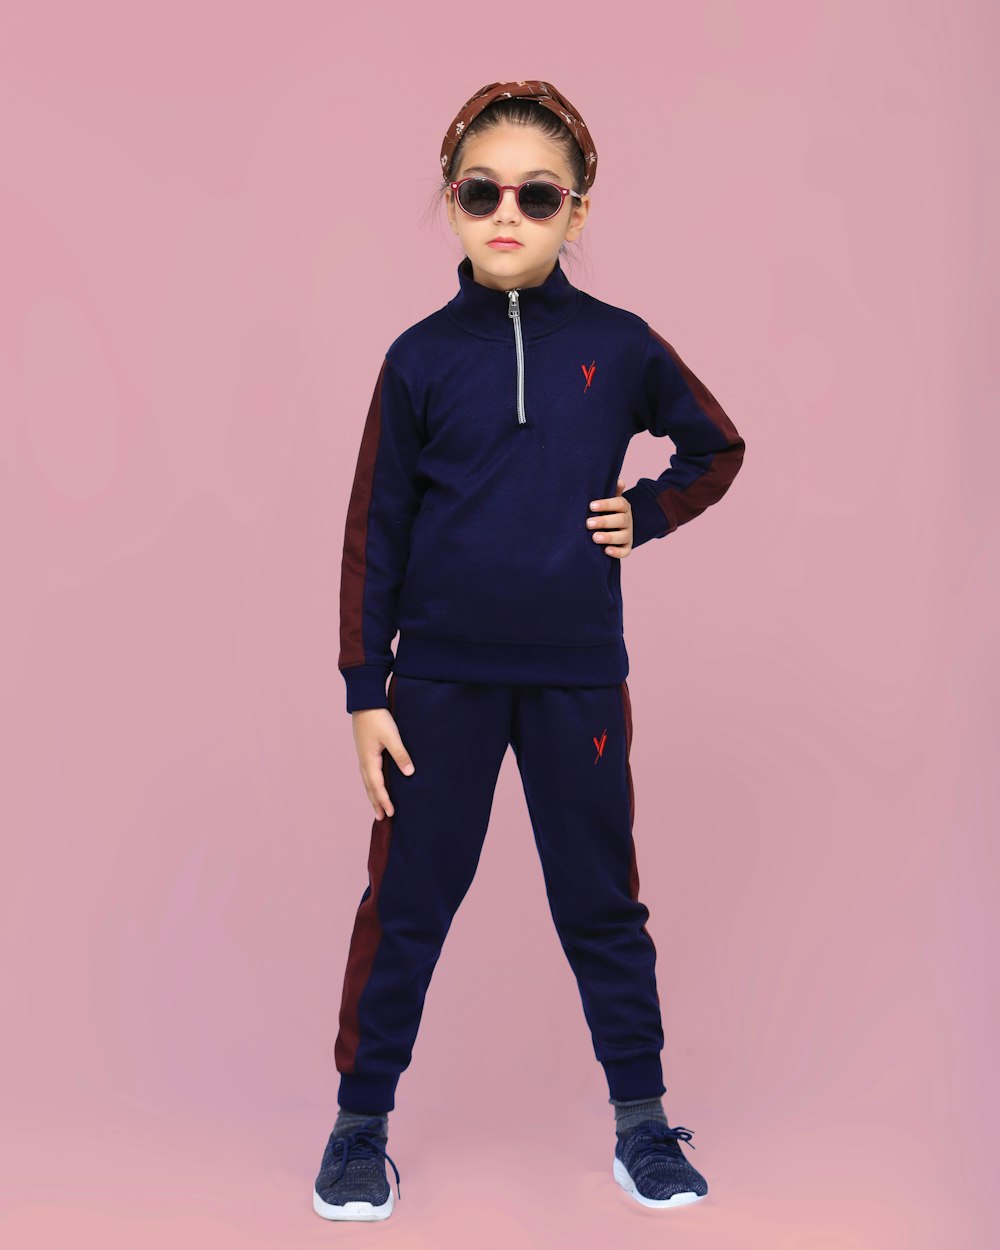 a little girl wearing sunglasses and a purple outfit